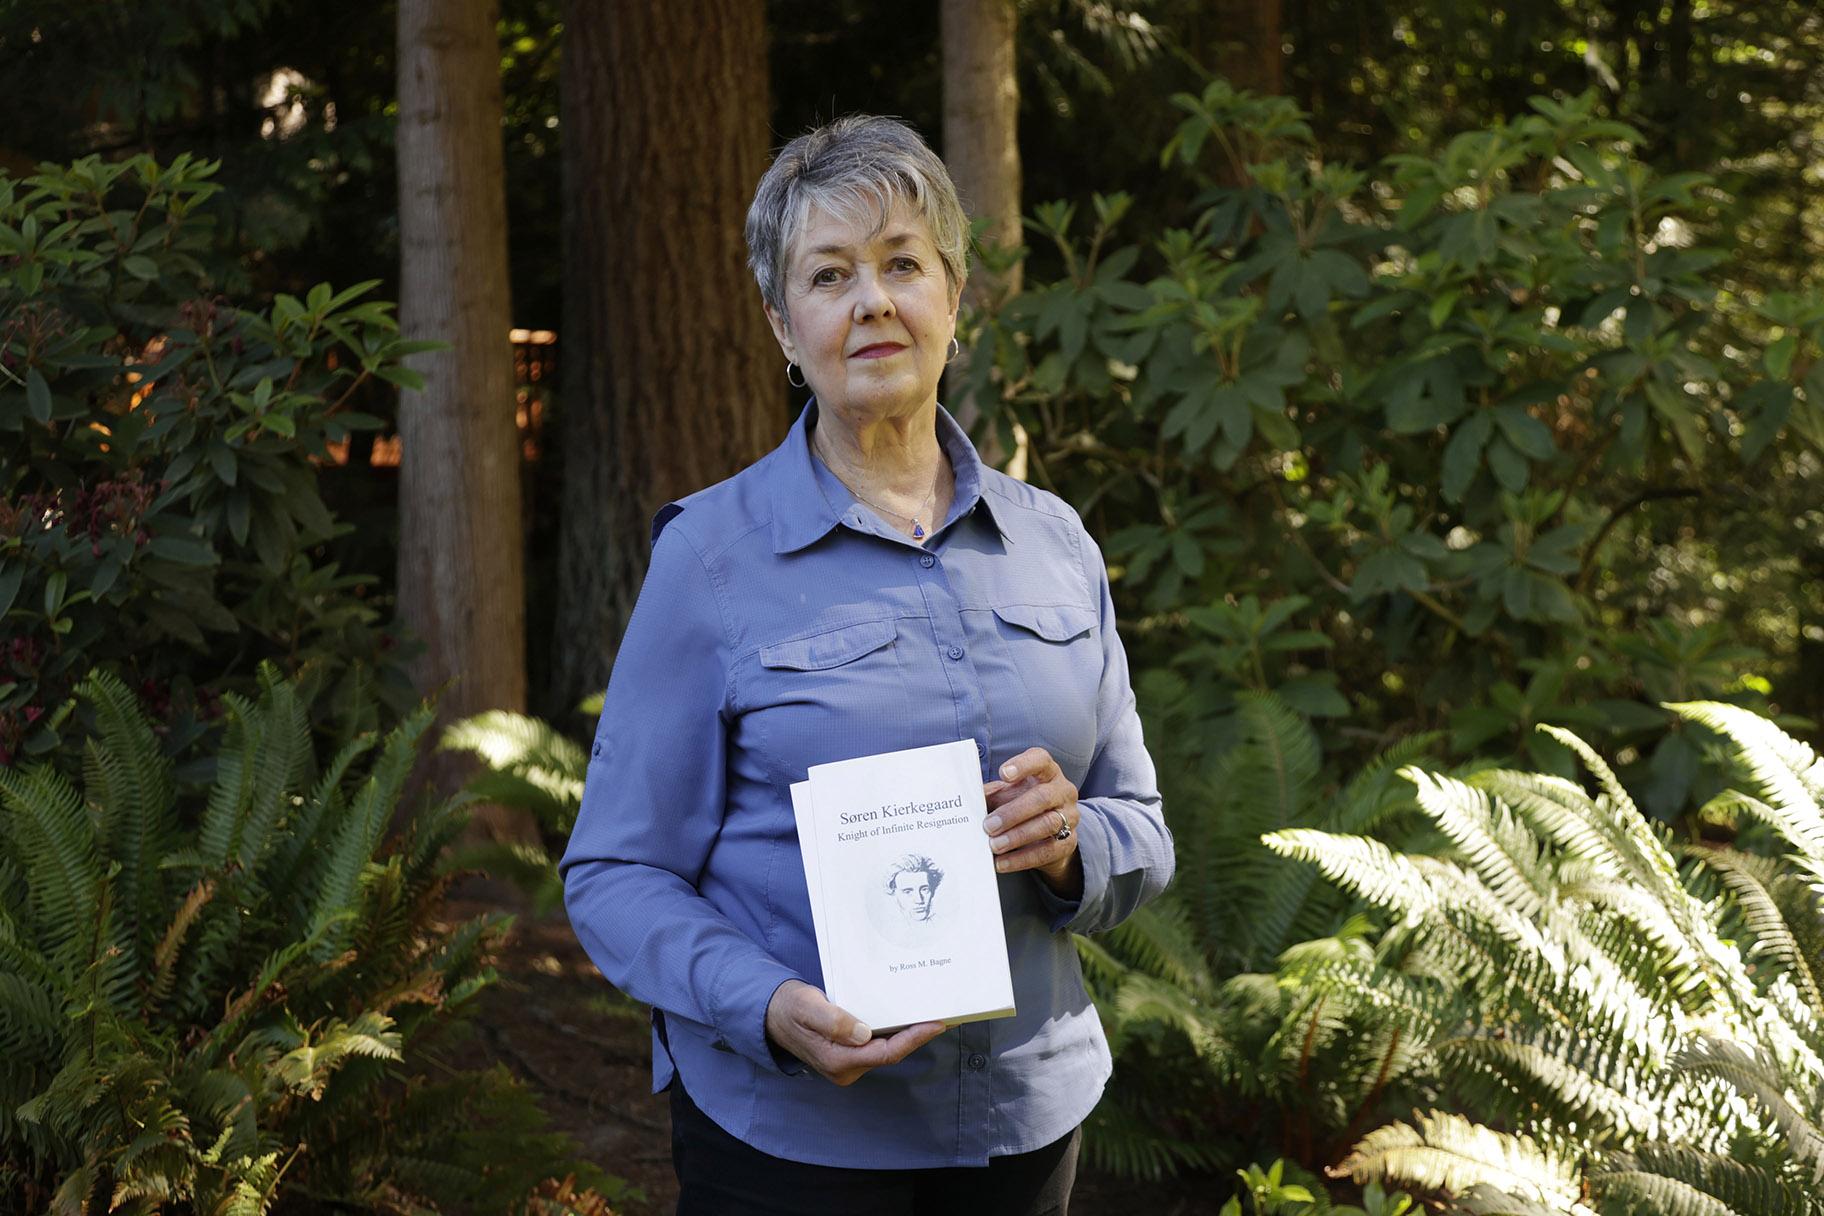 Karen McKnight stands in her backyard on Saturday, June 19, 2021, in Sammamish, Wash., holding two books written by her brother Ross Bagne of Cheyenne, Wyo. Nearly all COVID-19 deaths in the United States now are in people who weren’t vaccinated, like Bagne, a staggering demonstration of how effective the vaccines have been (AP Photo / John Froschauer)